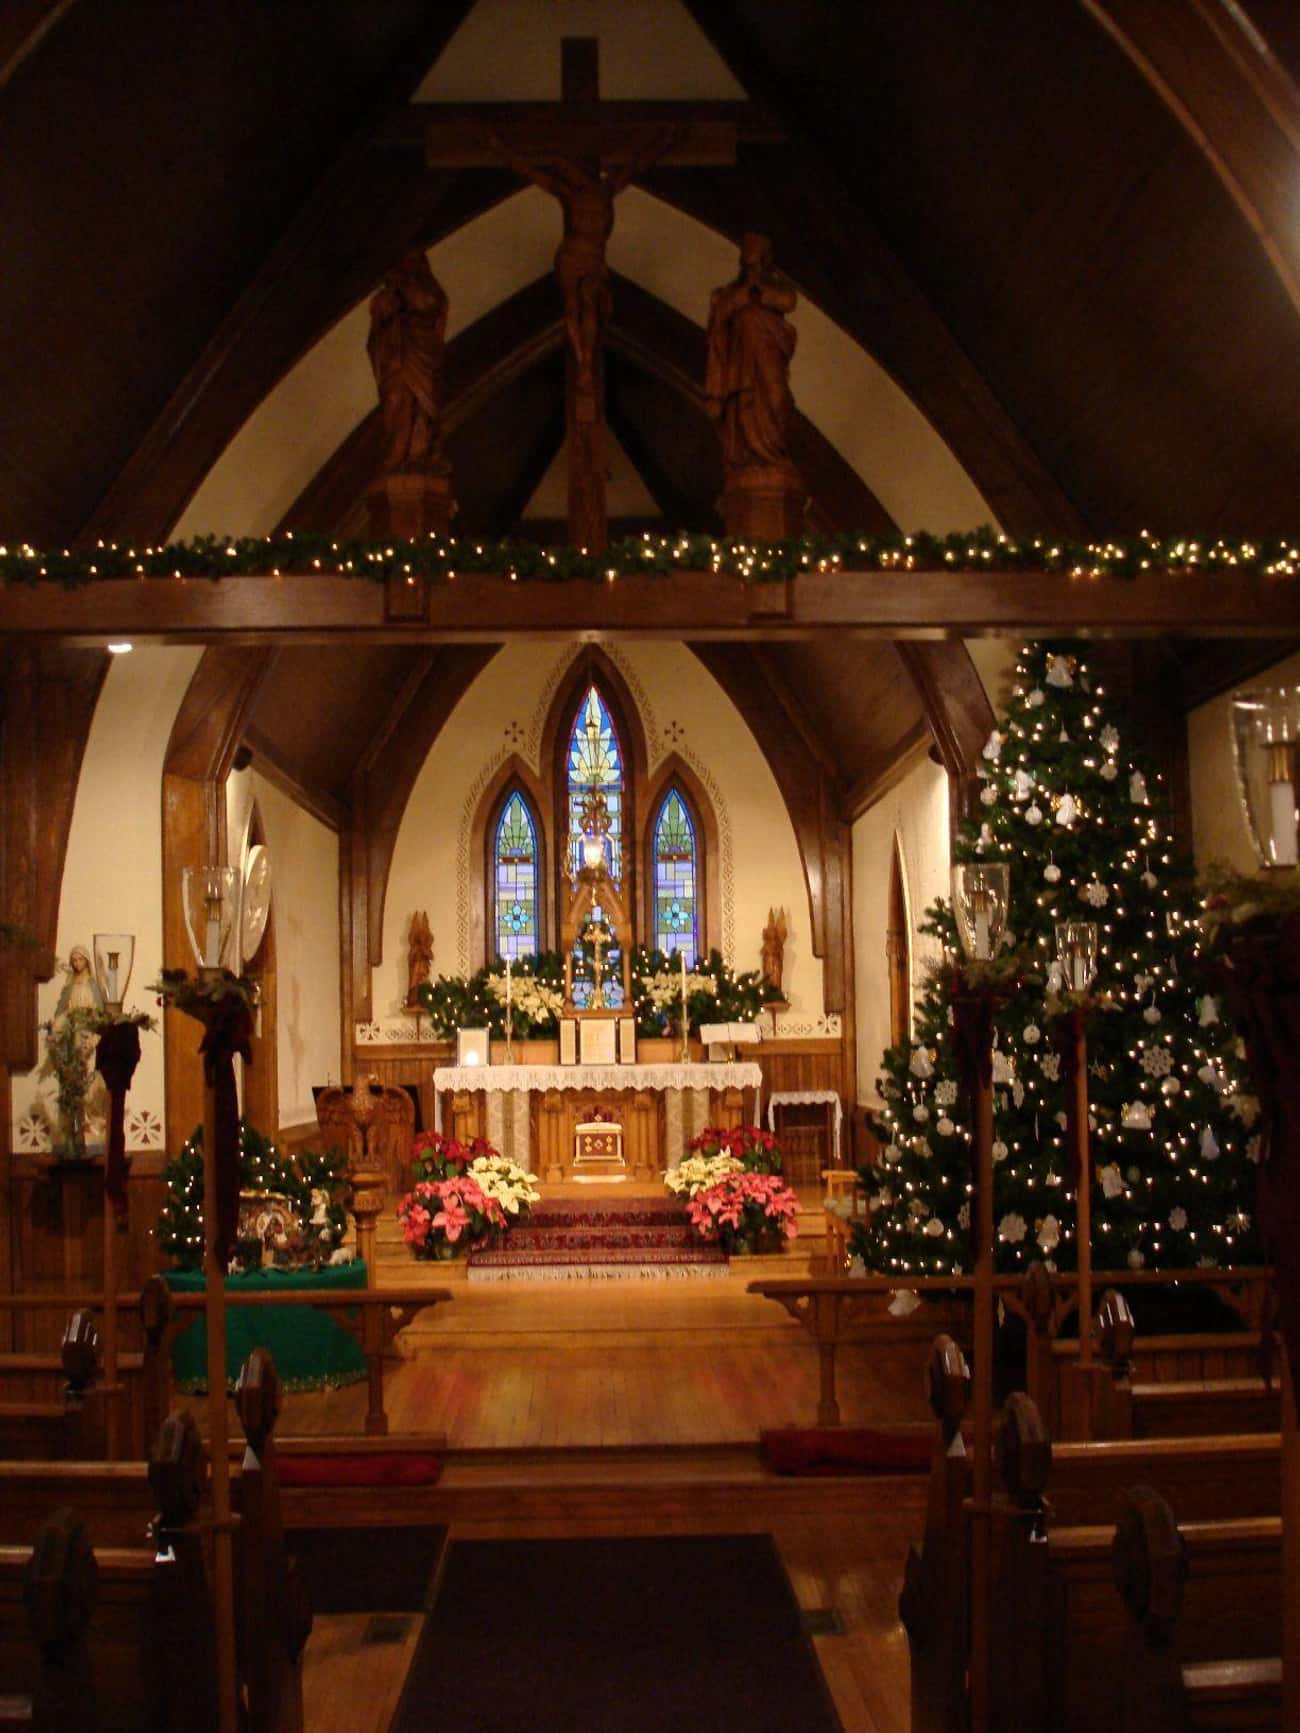 Christmas Is the Most Important Holiday in Christianity